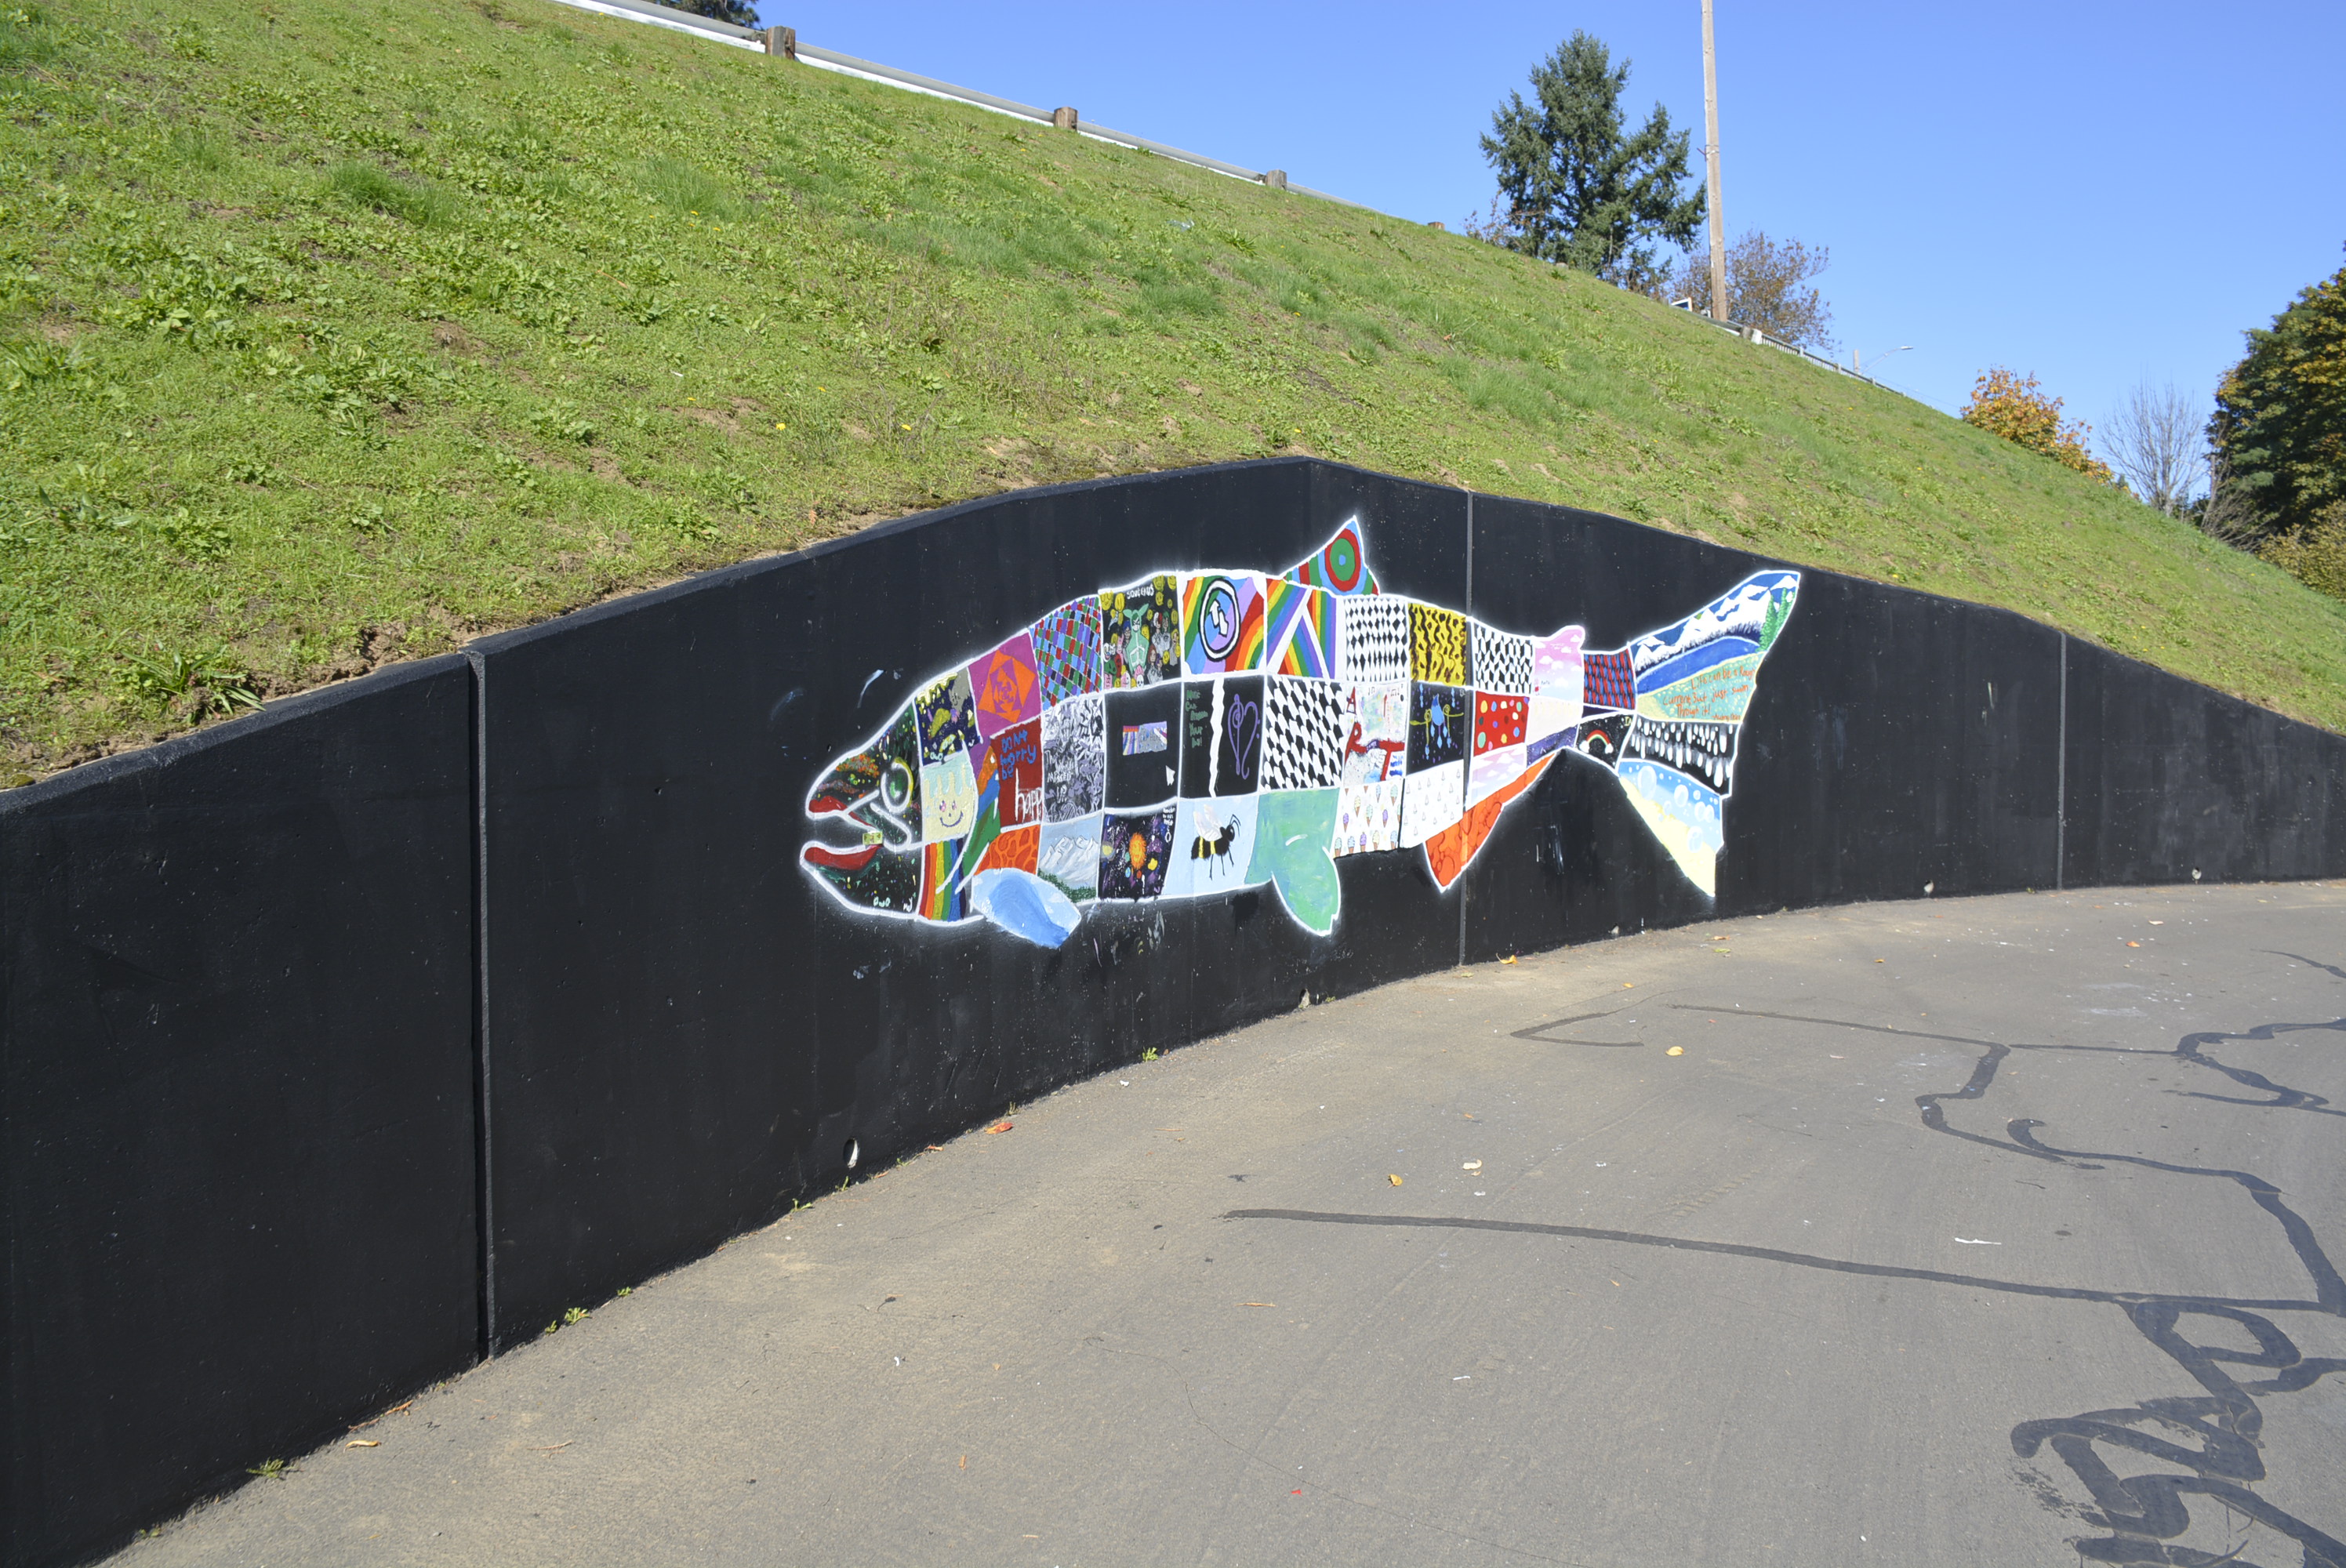 Mural of salmon made up of patches with individual artwork on black wall